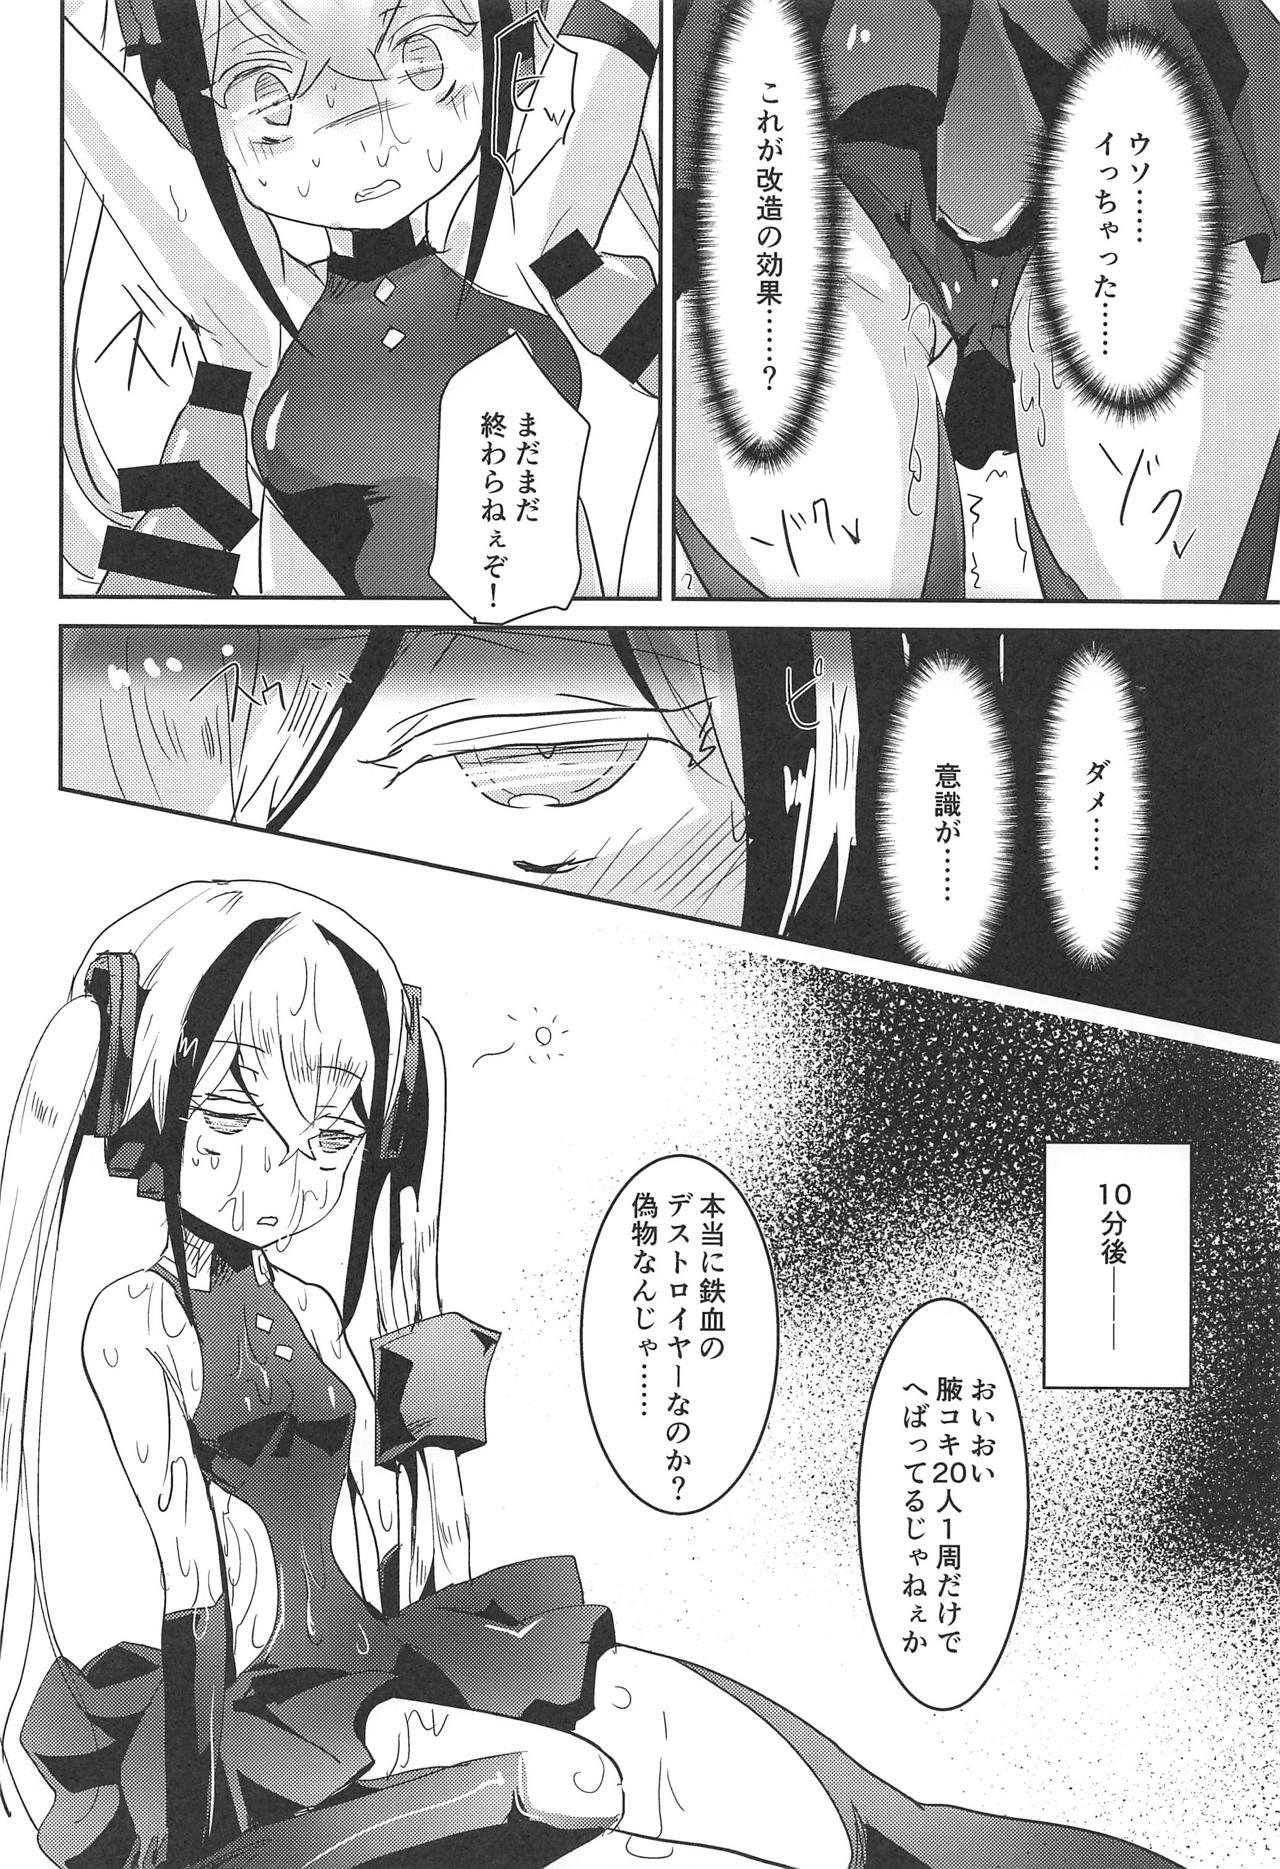 Culonas Miserable Dolls - Girls frontline Dominant - Page 11